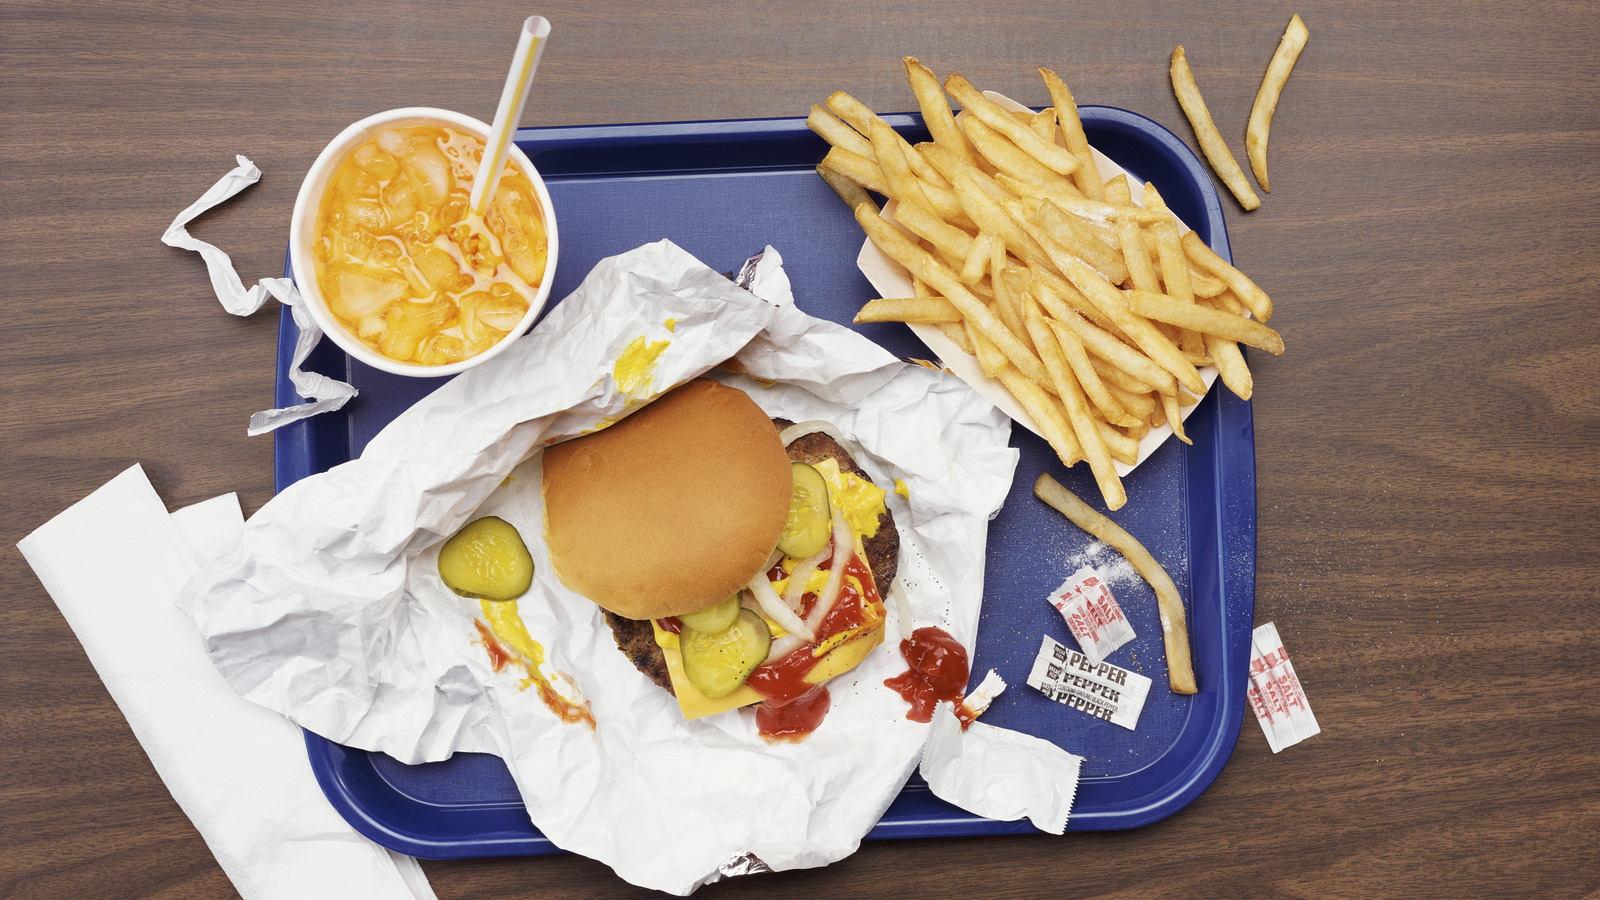 Where In The US Can You Find The Cheapest Fast Food Combos?